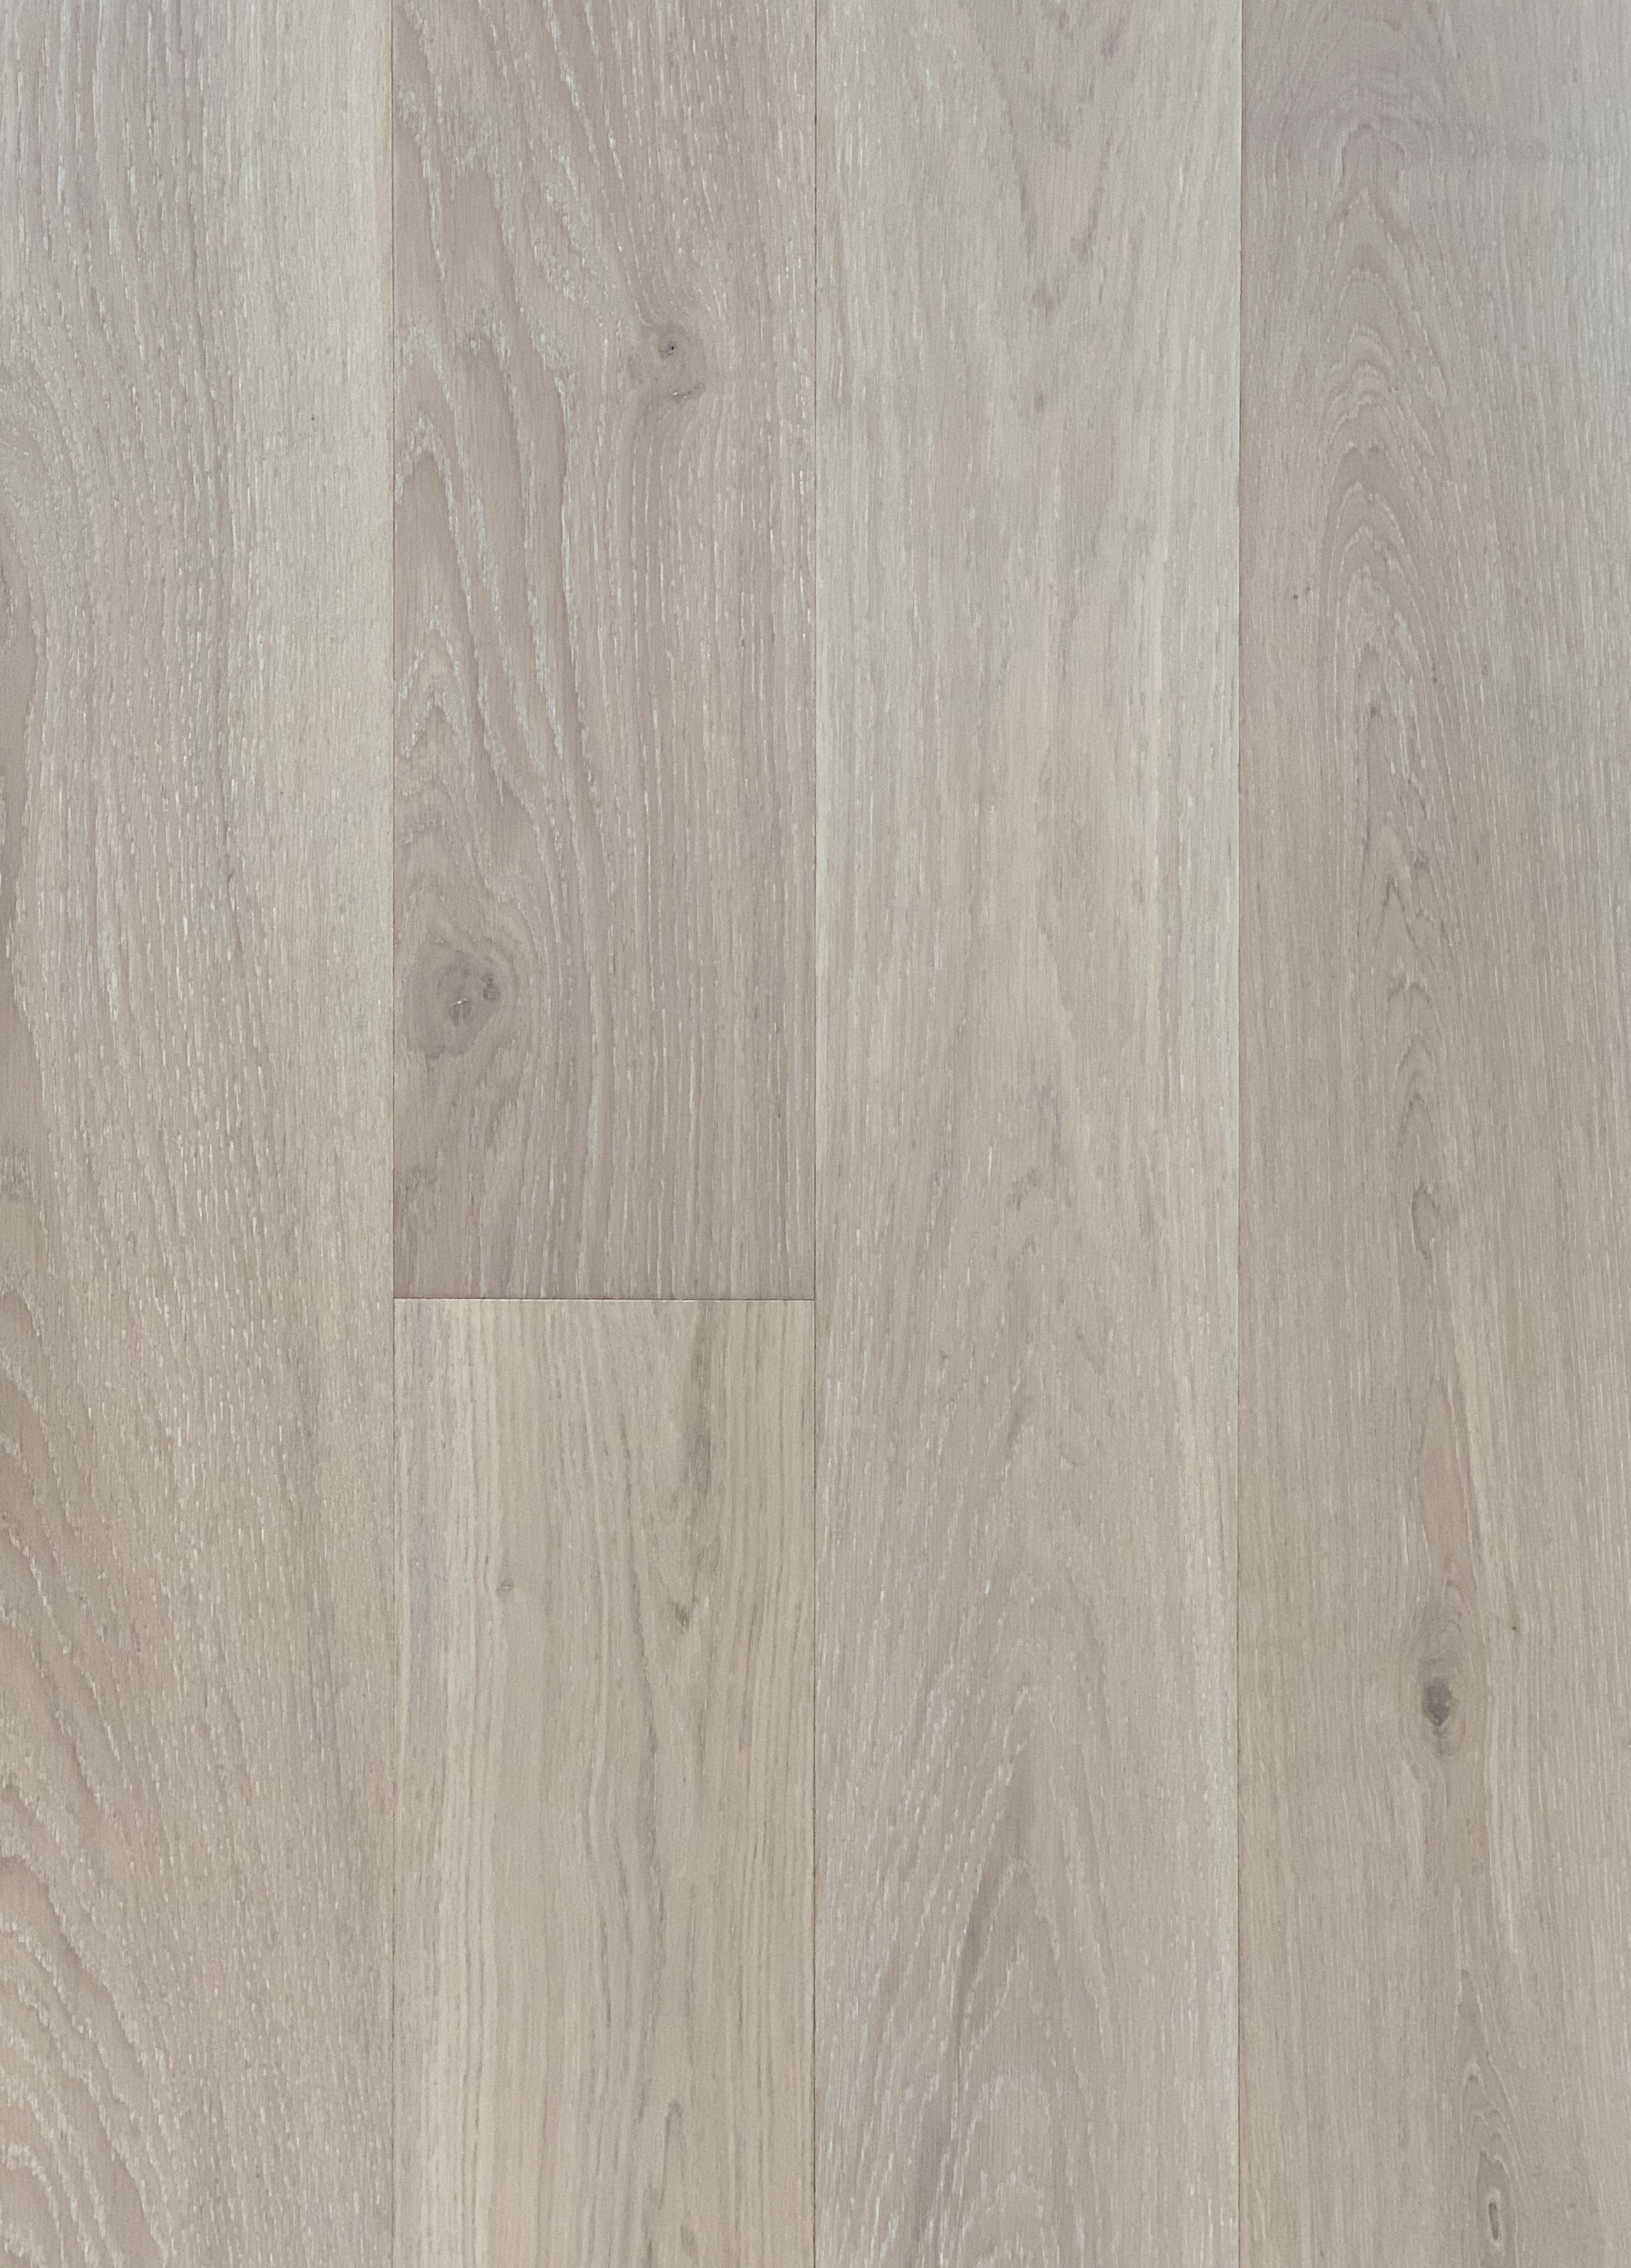 Euro oak french grey suppliers in melbourne